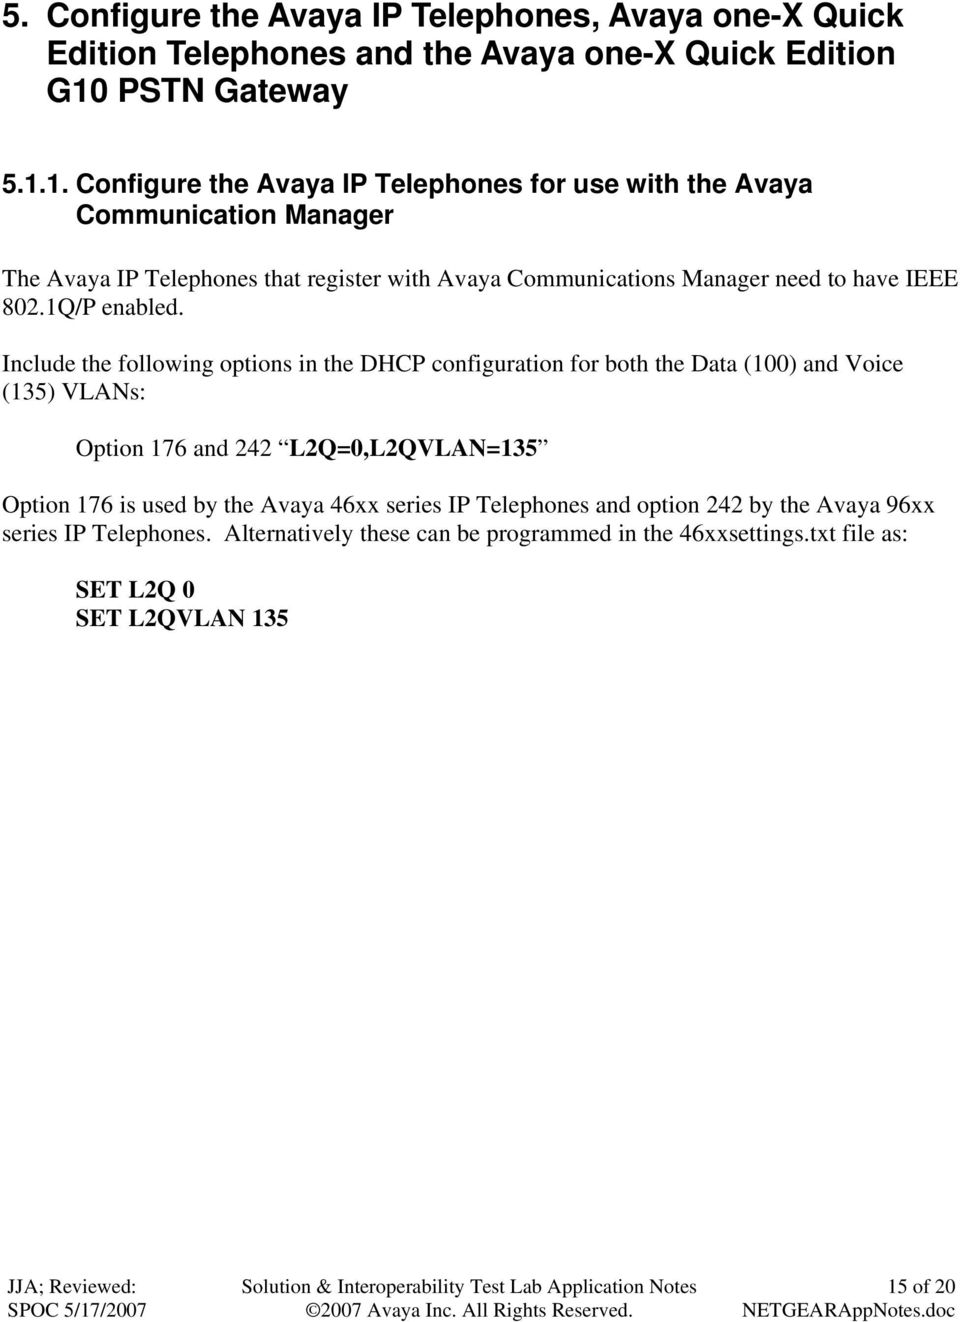 1. Configure the Avaya IP Telephones for use with the Avaya Communication Manager The Avaya IP Telephones that register with Avaya Communications Manager need to have